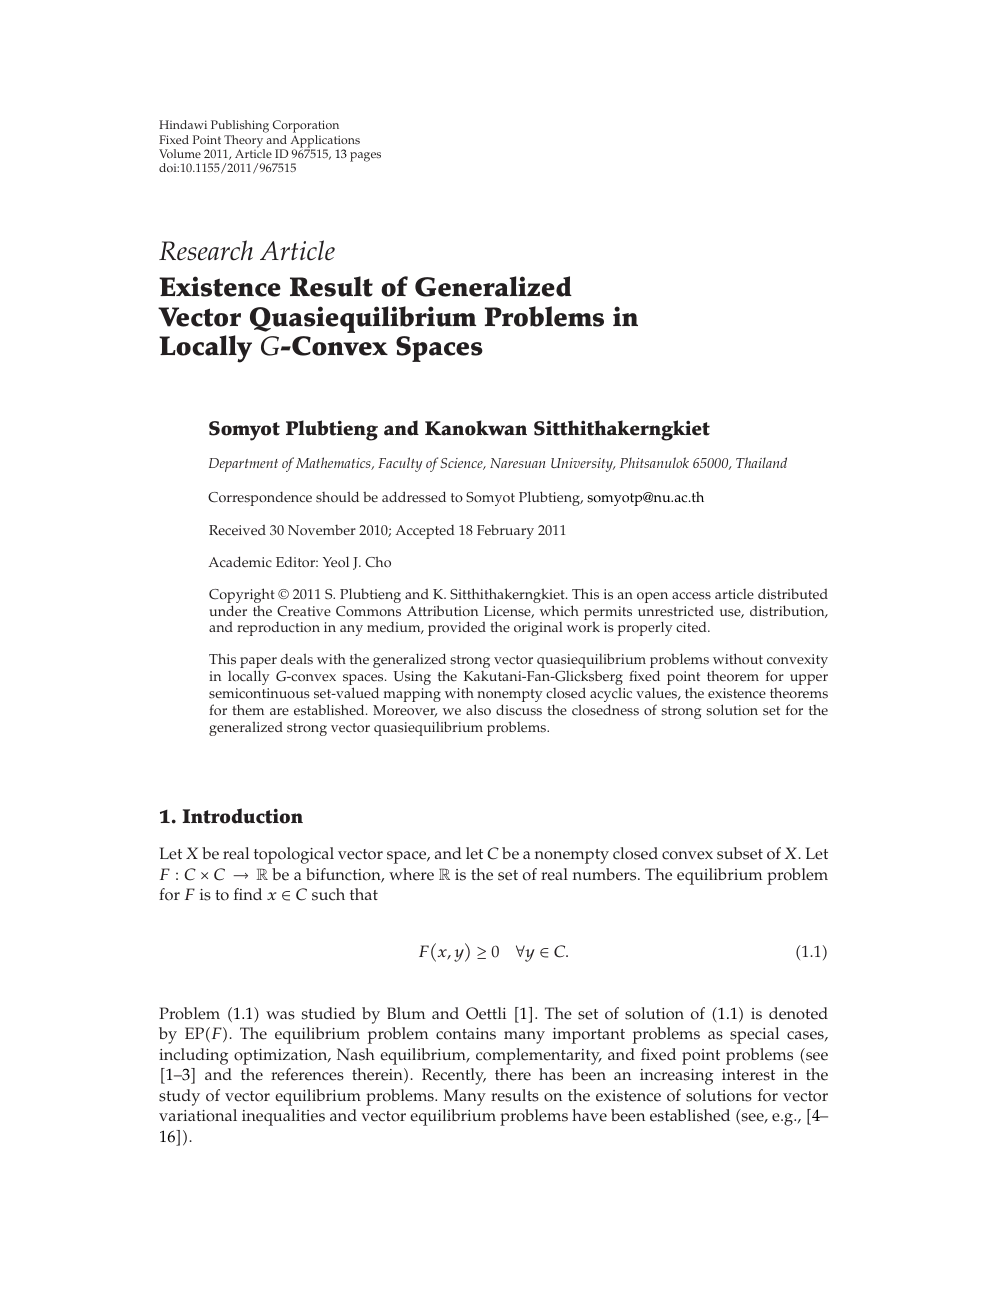 Existence Result Of Generalized Vector Quasiequilibrium Problems In Locally G Convex Spaces Topic Of Research Paper In Mathematics Download Scholarly Article Pdf And Read For Free On Cyberleninka Open Science Hub